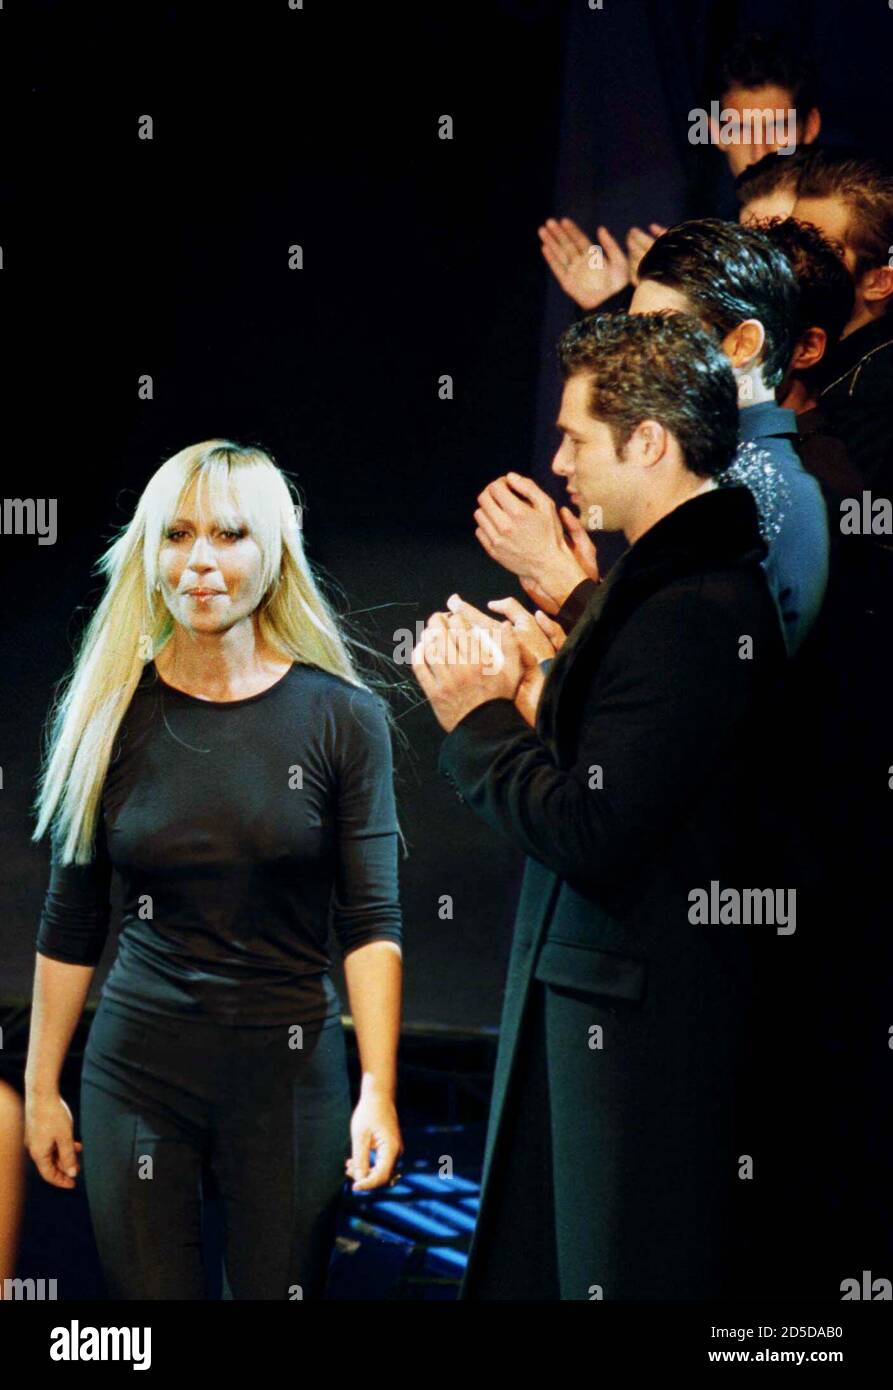 hurken hoop slecht humeur Designer Donatella Versace walks out at the end of the Gianni Versace men's  ready-to-wear autumn/winter 99 collection show January 11. This was Donatella  Versace's first collection after her brother Gianni was murdered